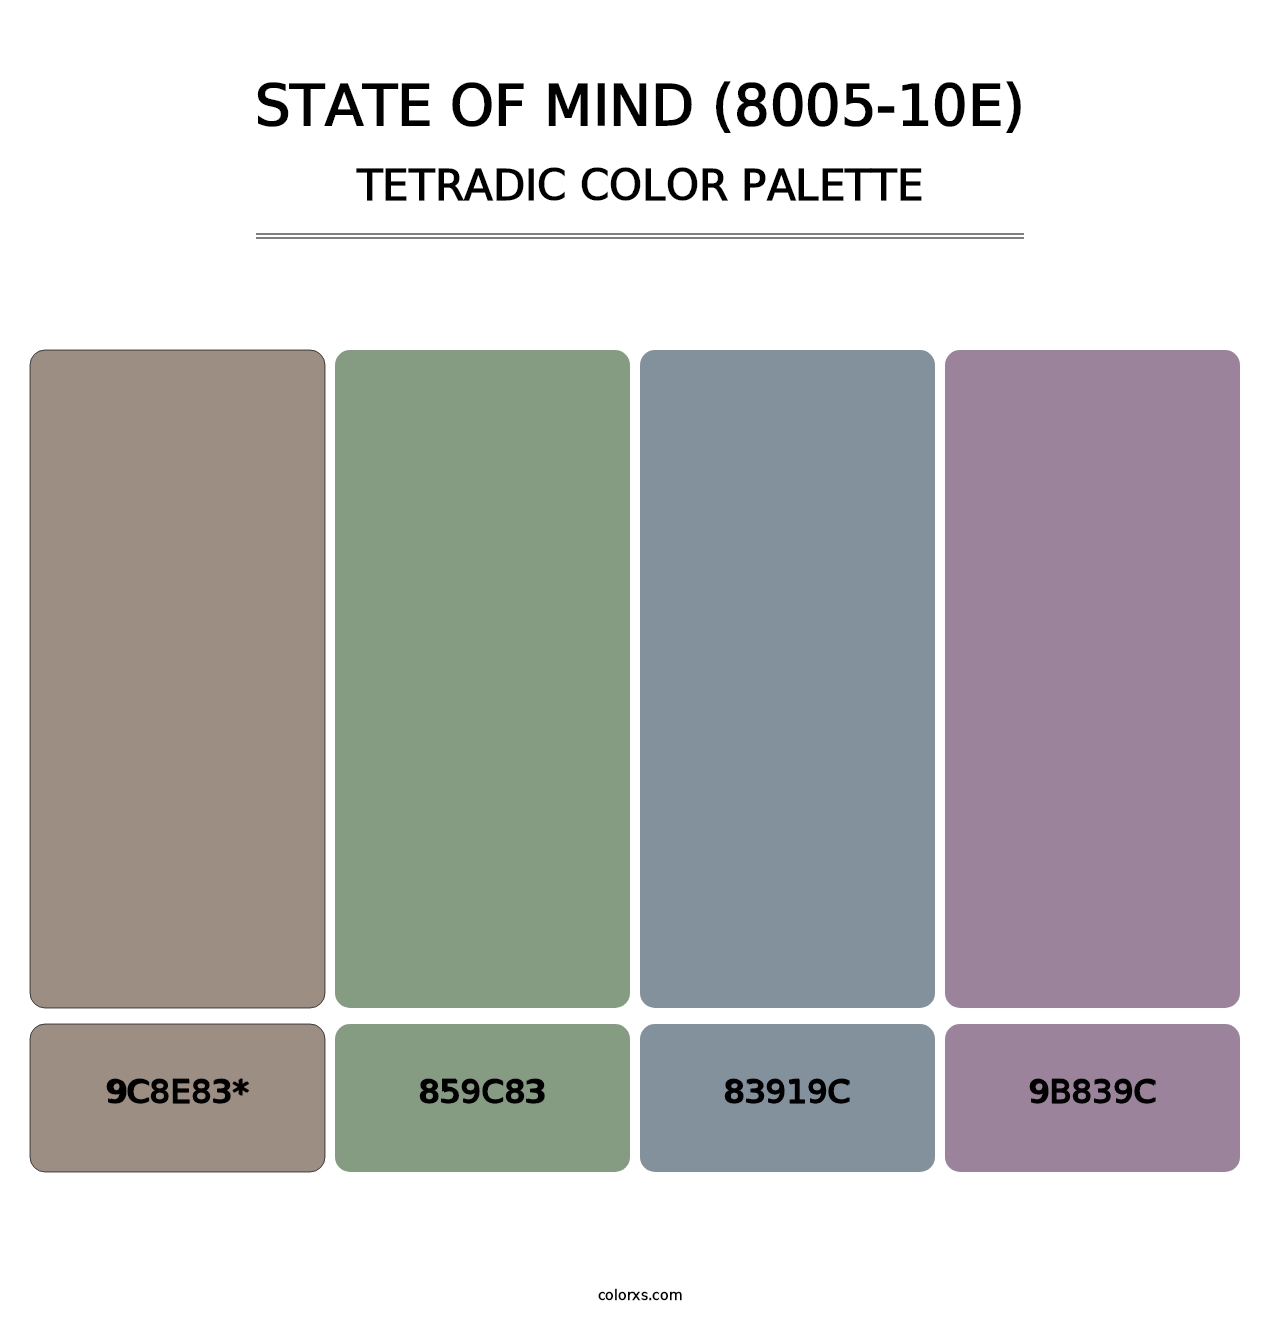 State of Mind (8005-10E) - Tetradic Color Palette